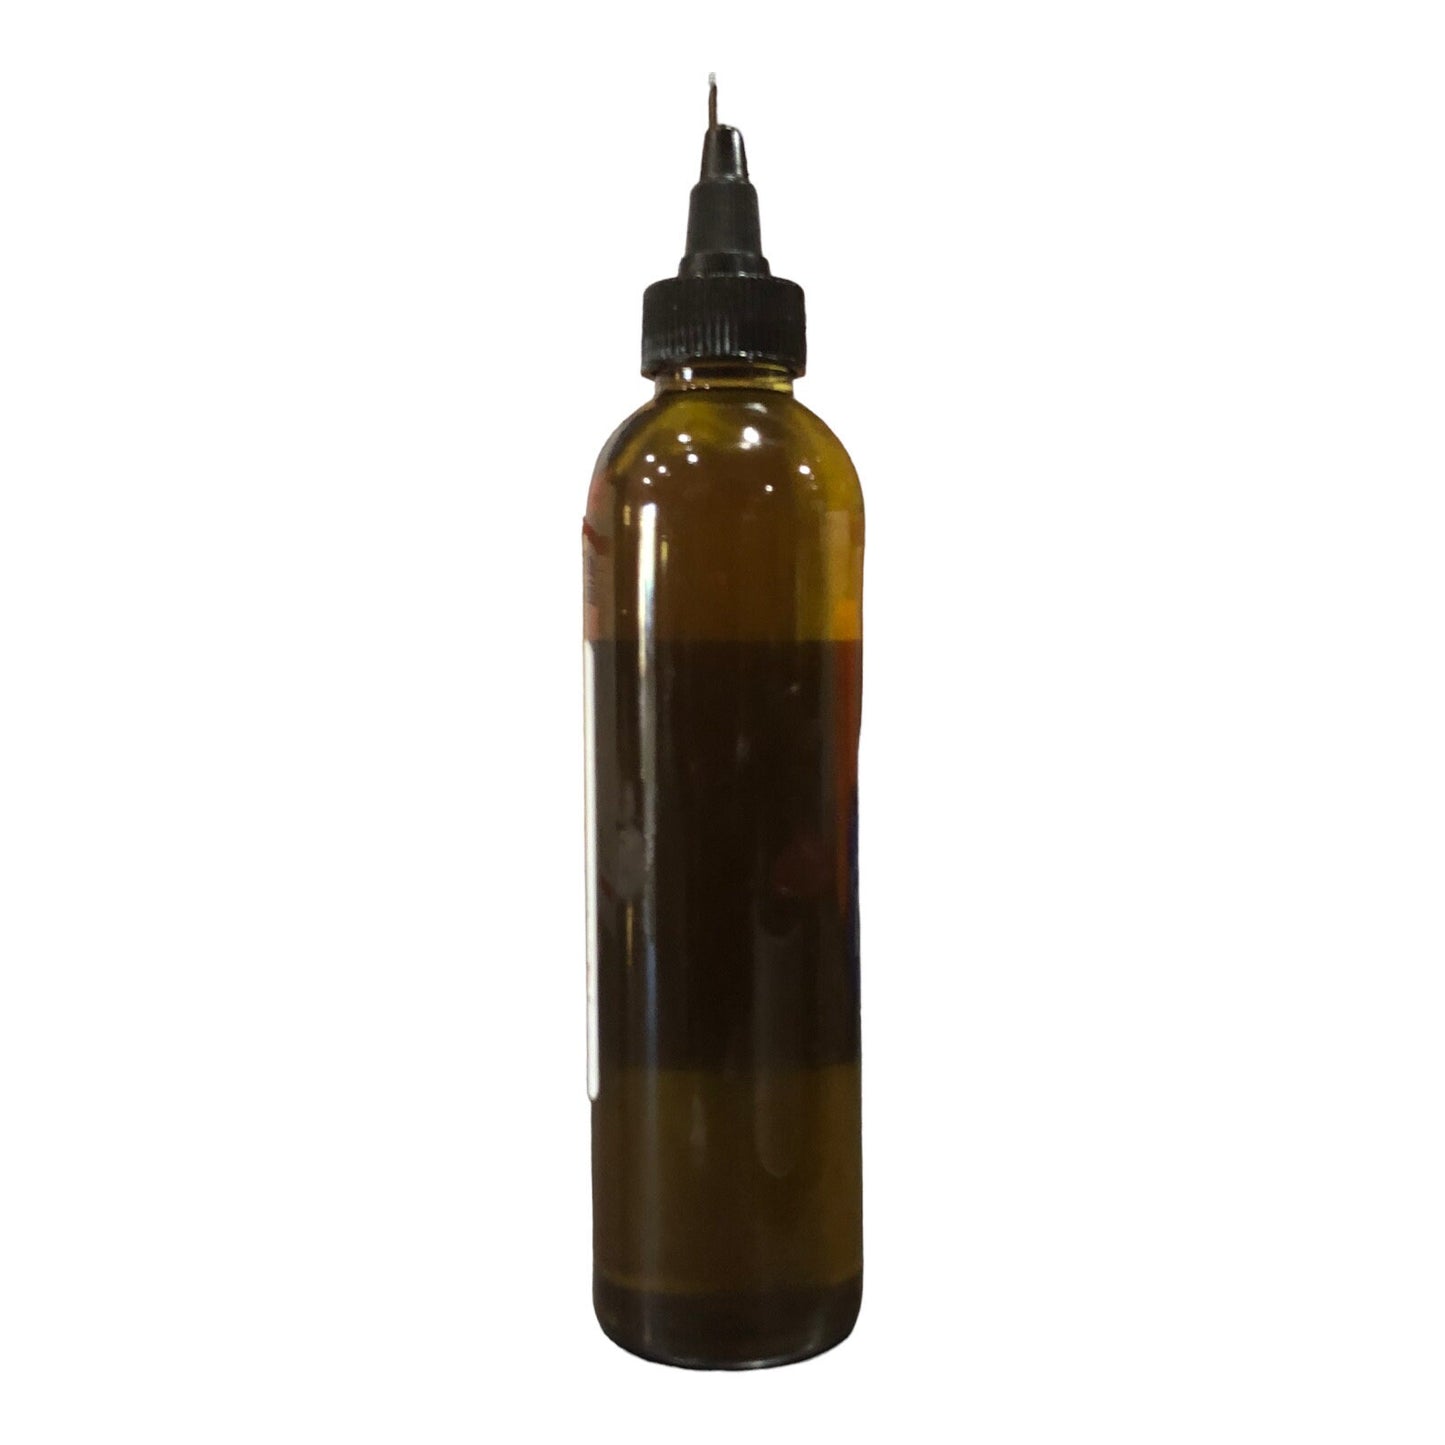 Chebe Oil Infused Olive Oil- 8oz.